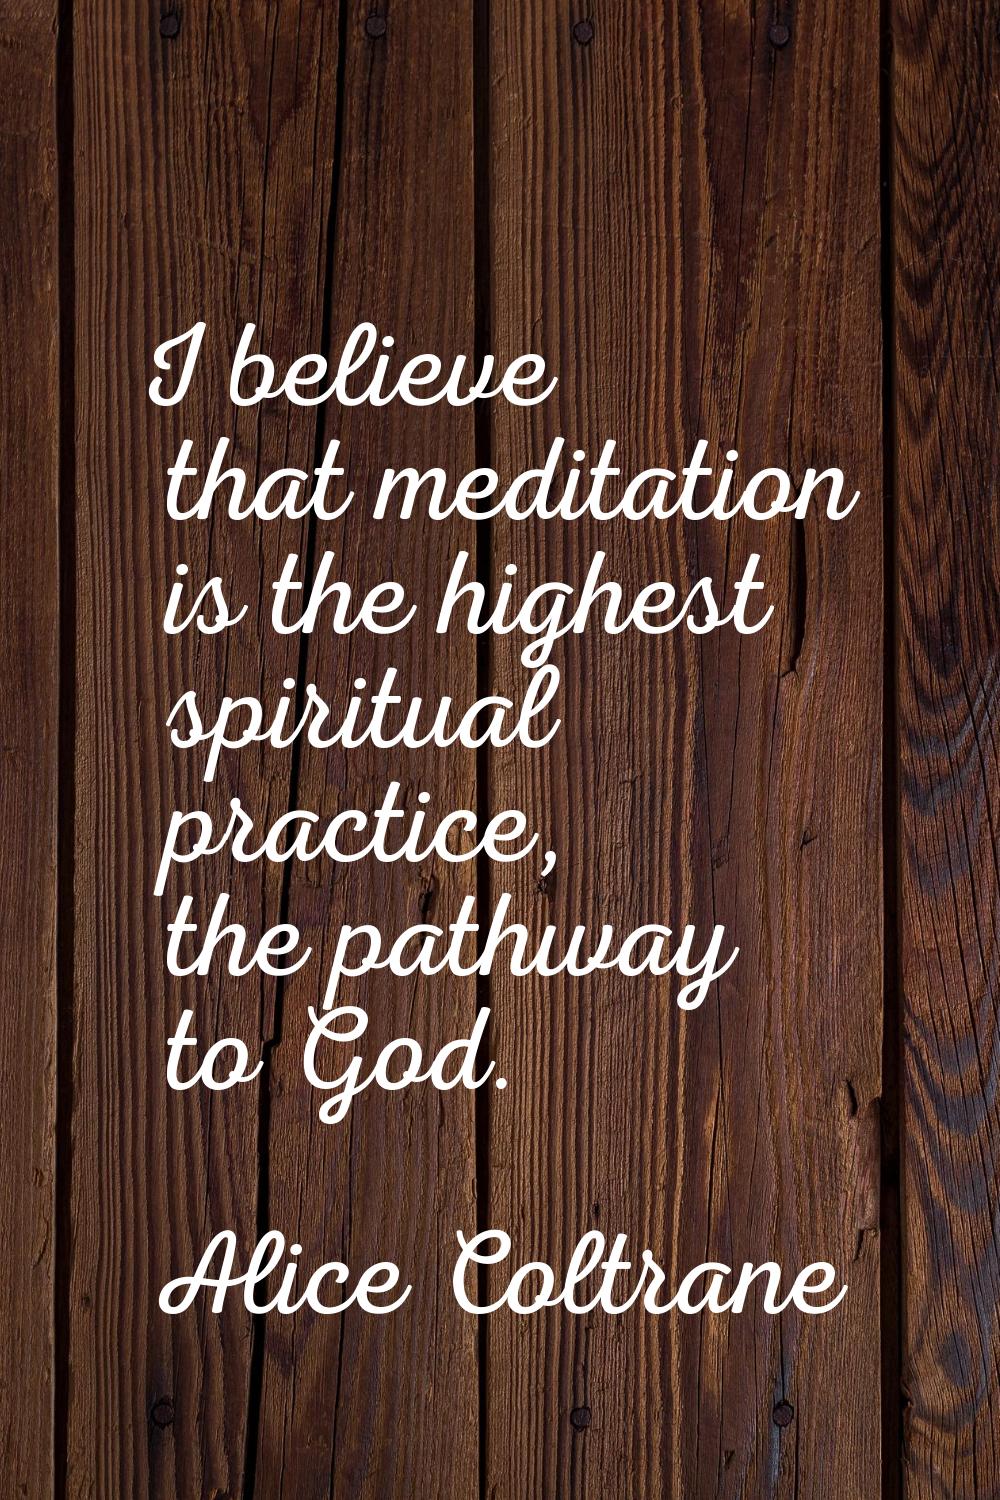 I believe that meditation is the highest spiritual practice, the pathway to God.